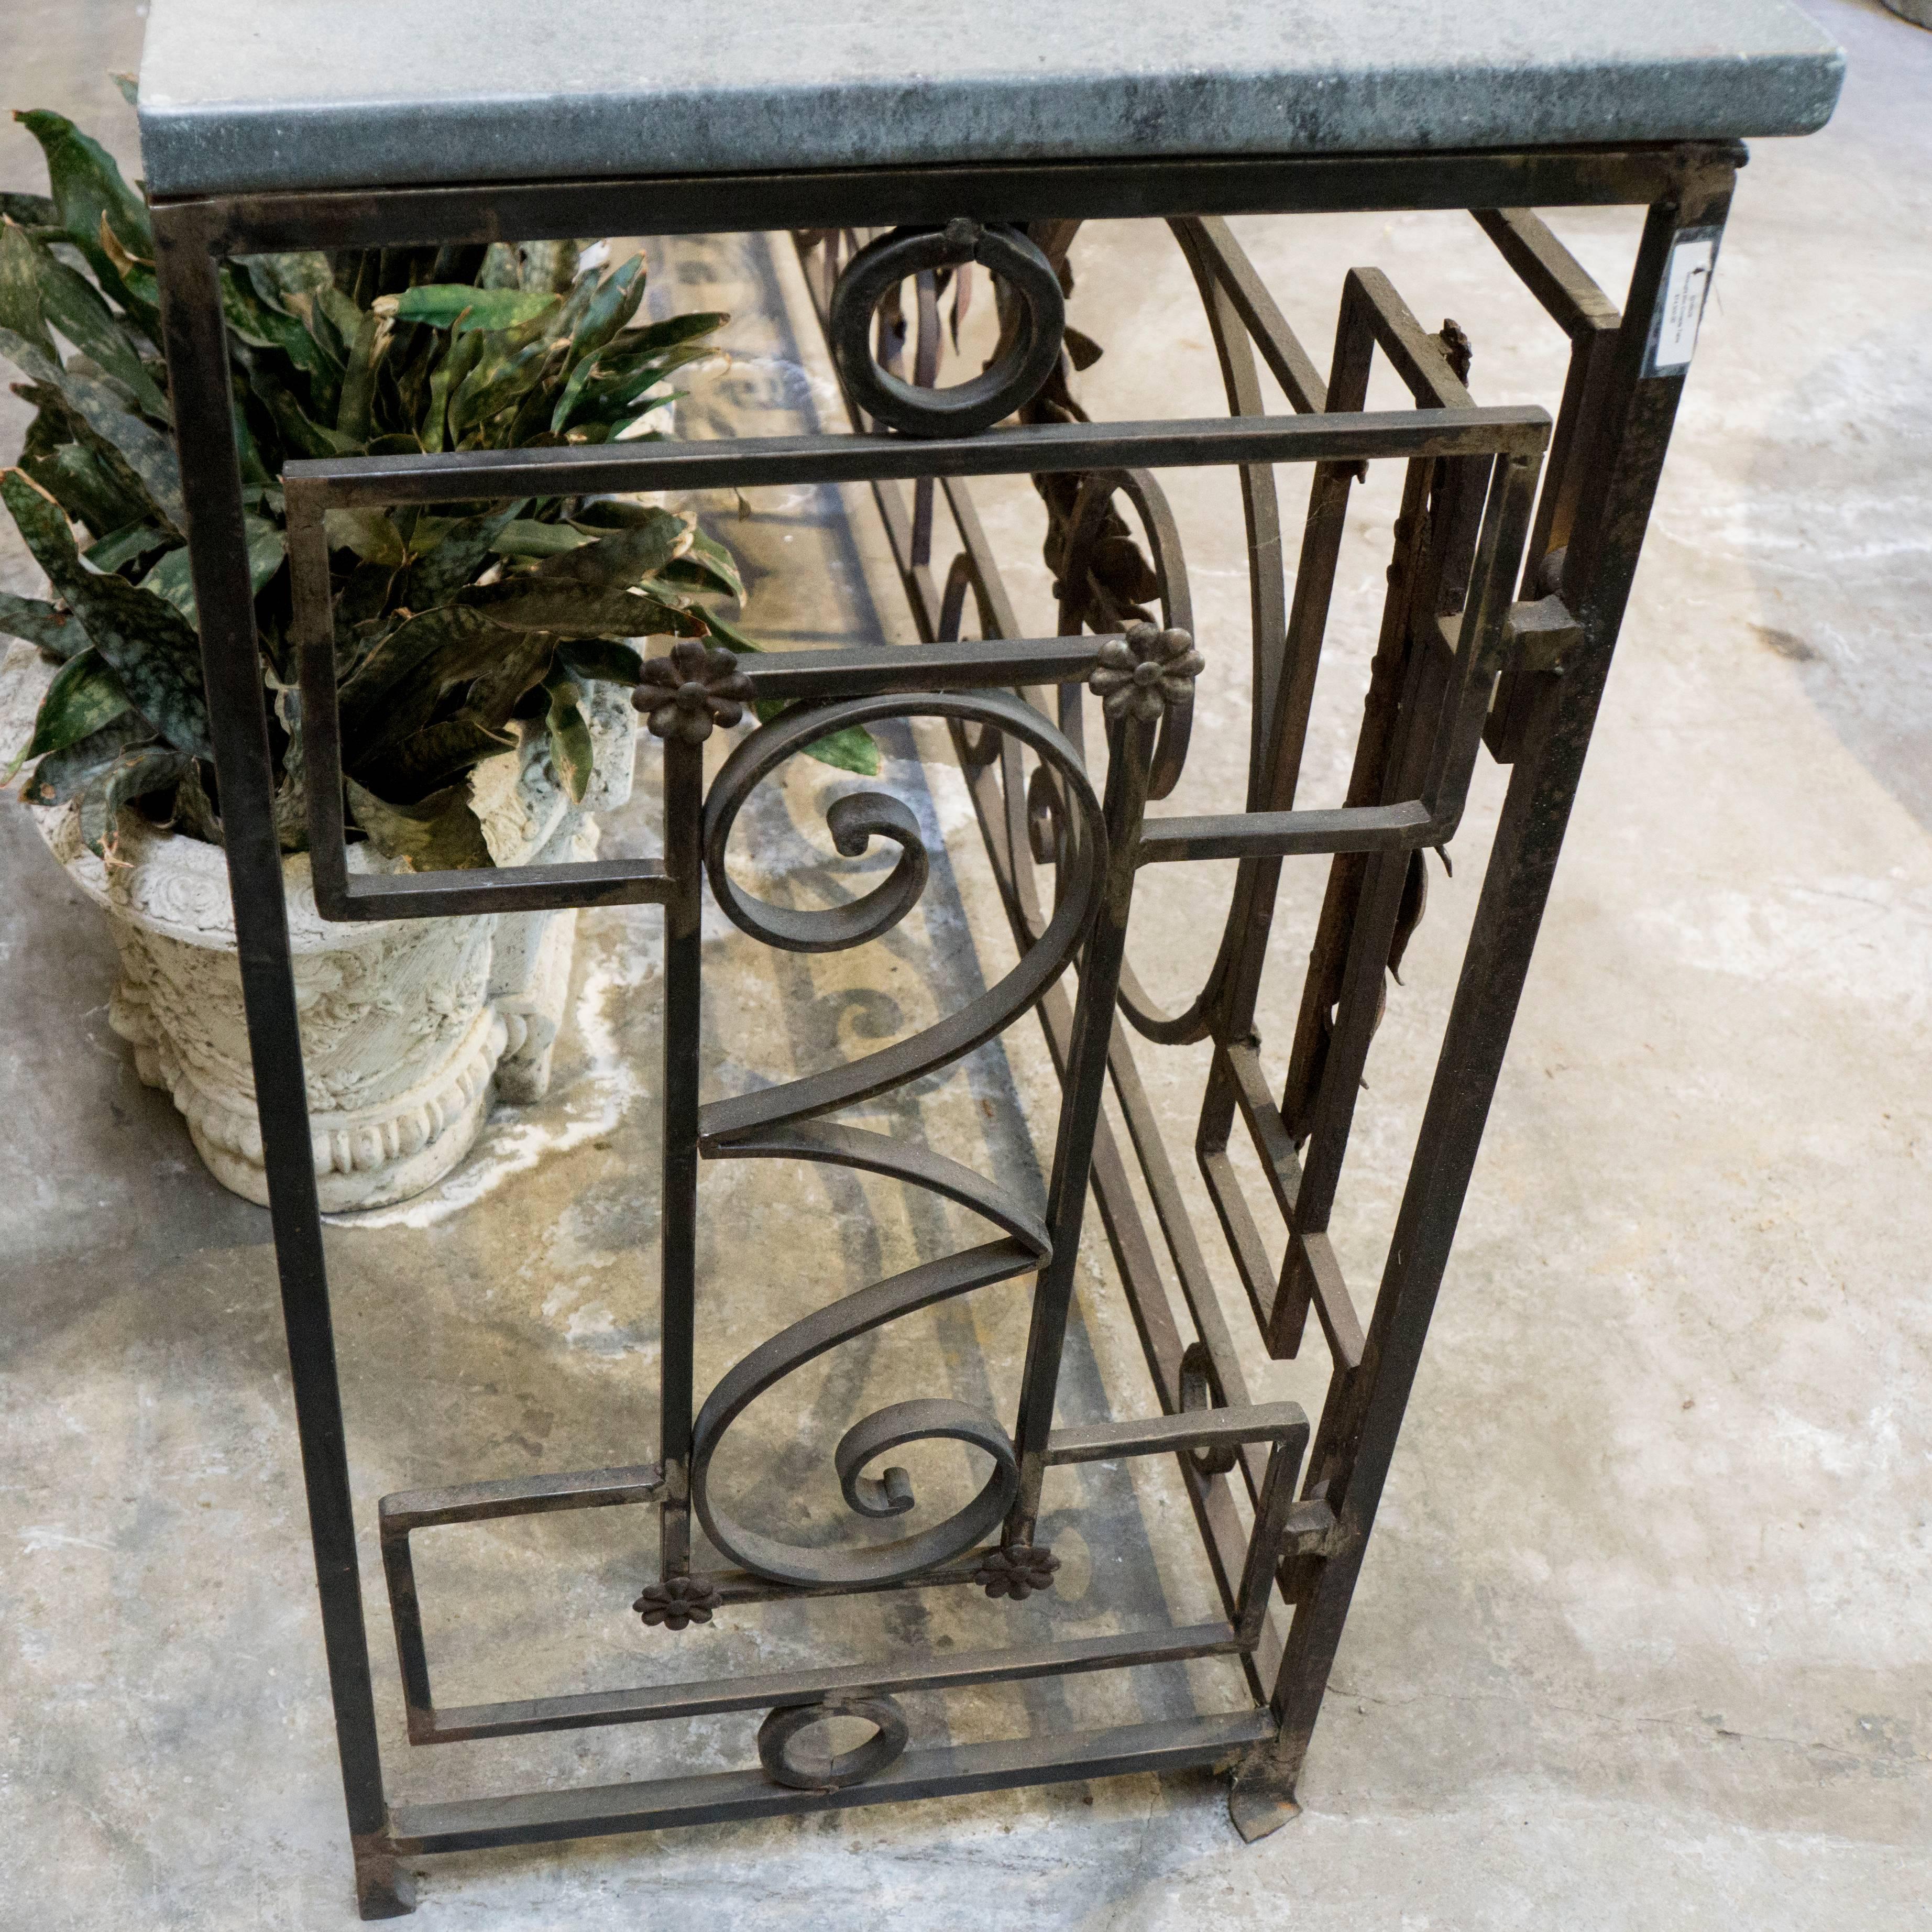 Antique French console table, circa 1880, featuring creative wrought iron spiral and box design with decorative leaf accents. New stone table surfaces are in three pieces, each one is about 33 inches long. They are a cool dark grey, smooth and full